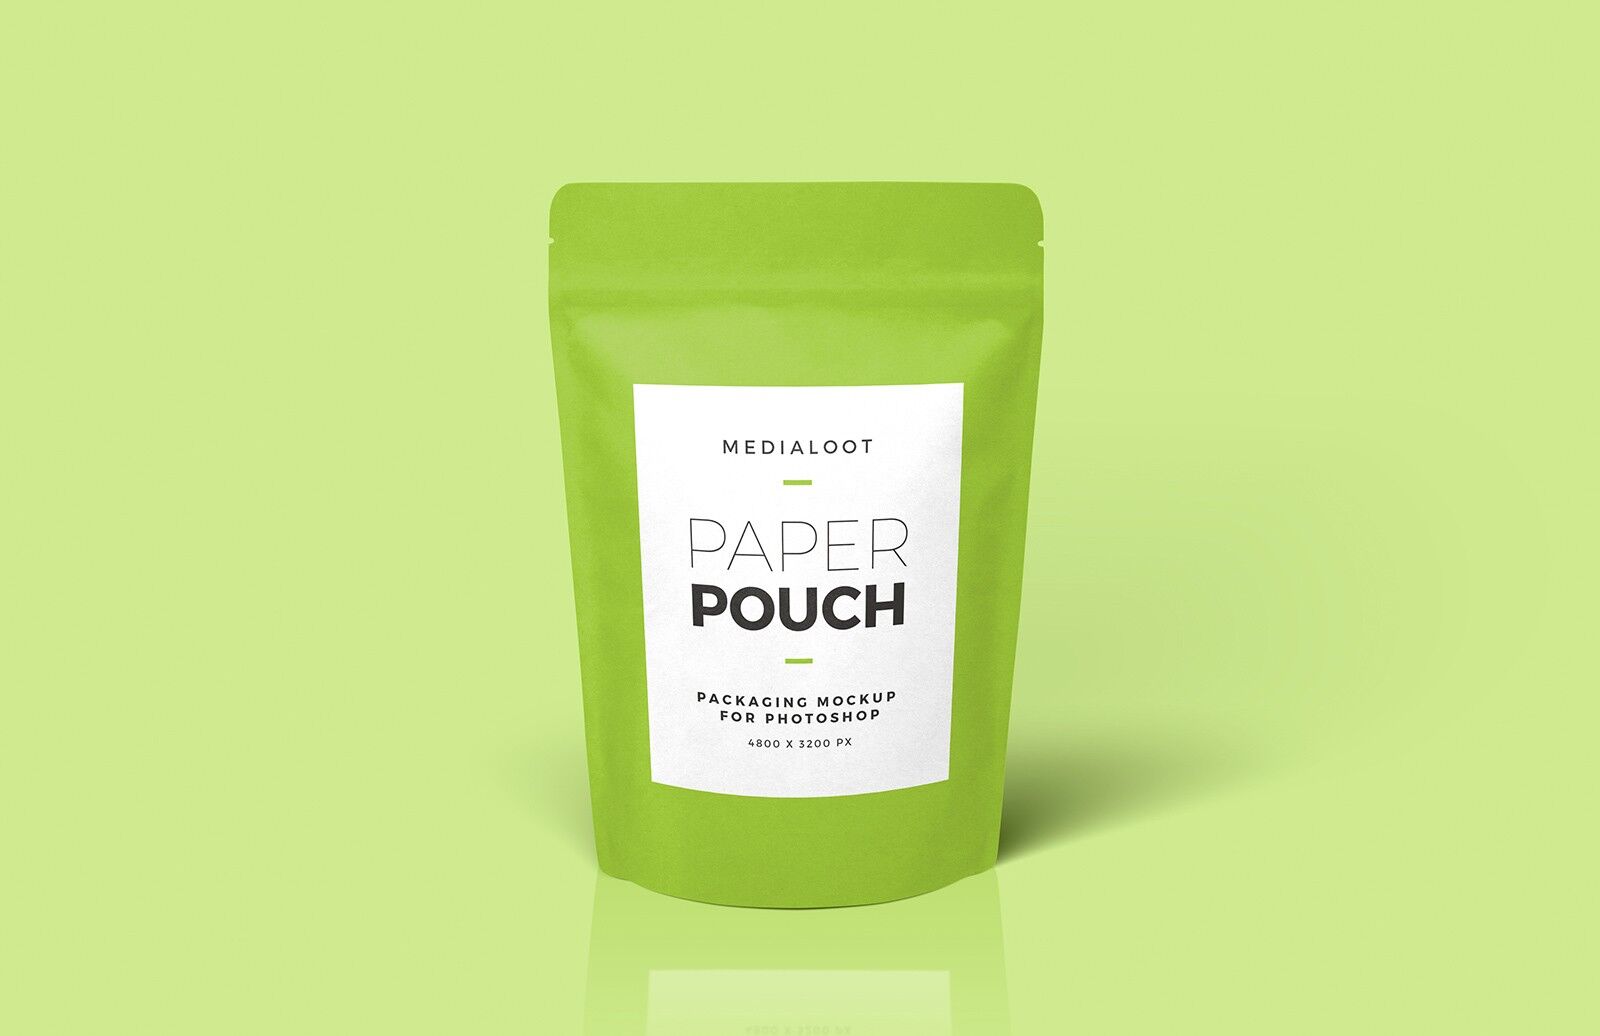 Zip Paper Pouch Packaging Mockup Design FREE PSD